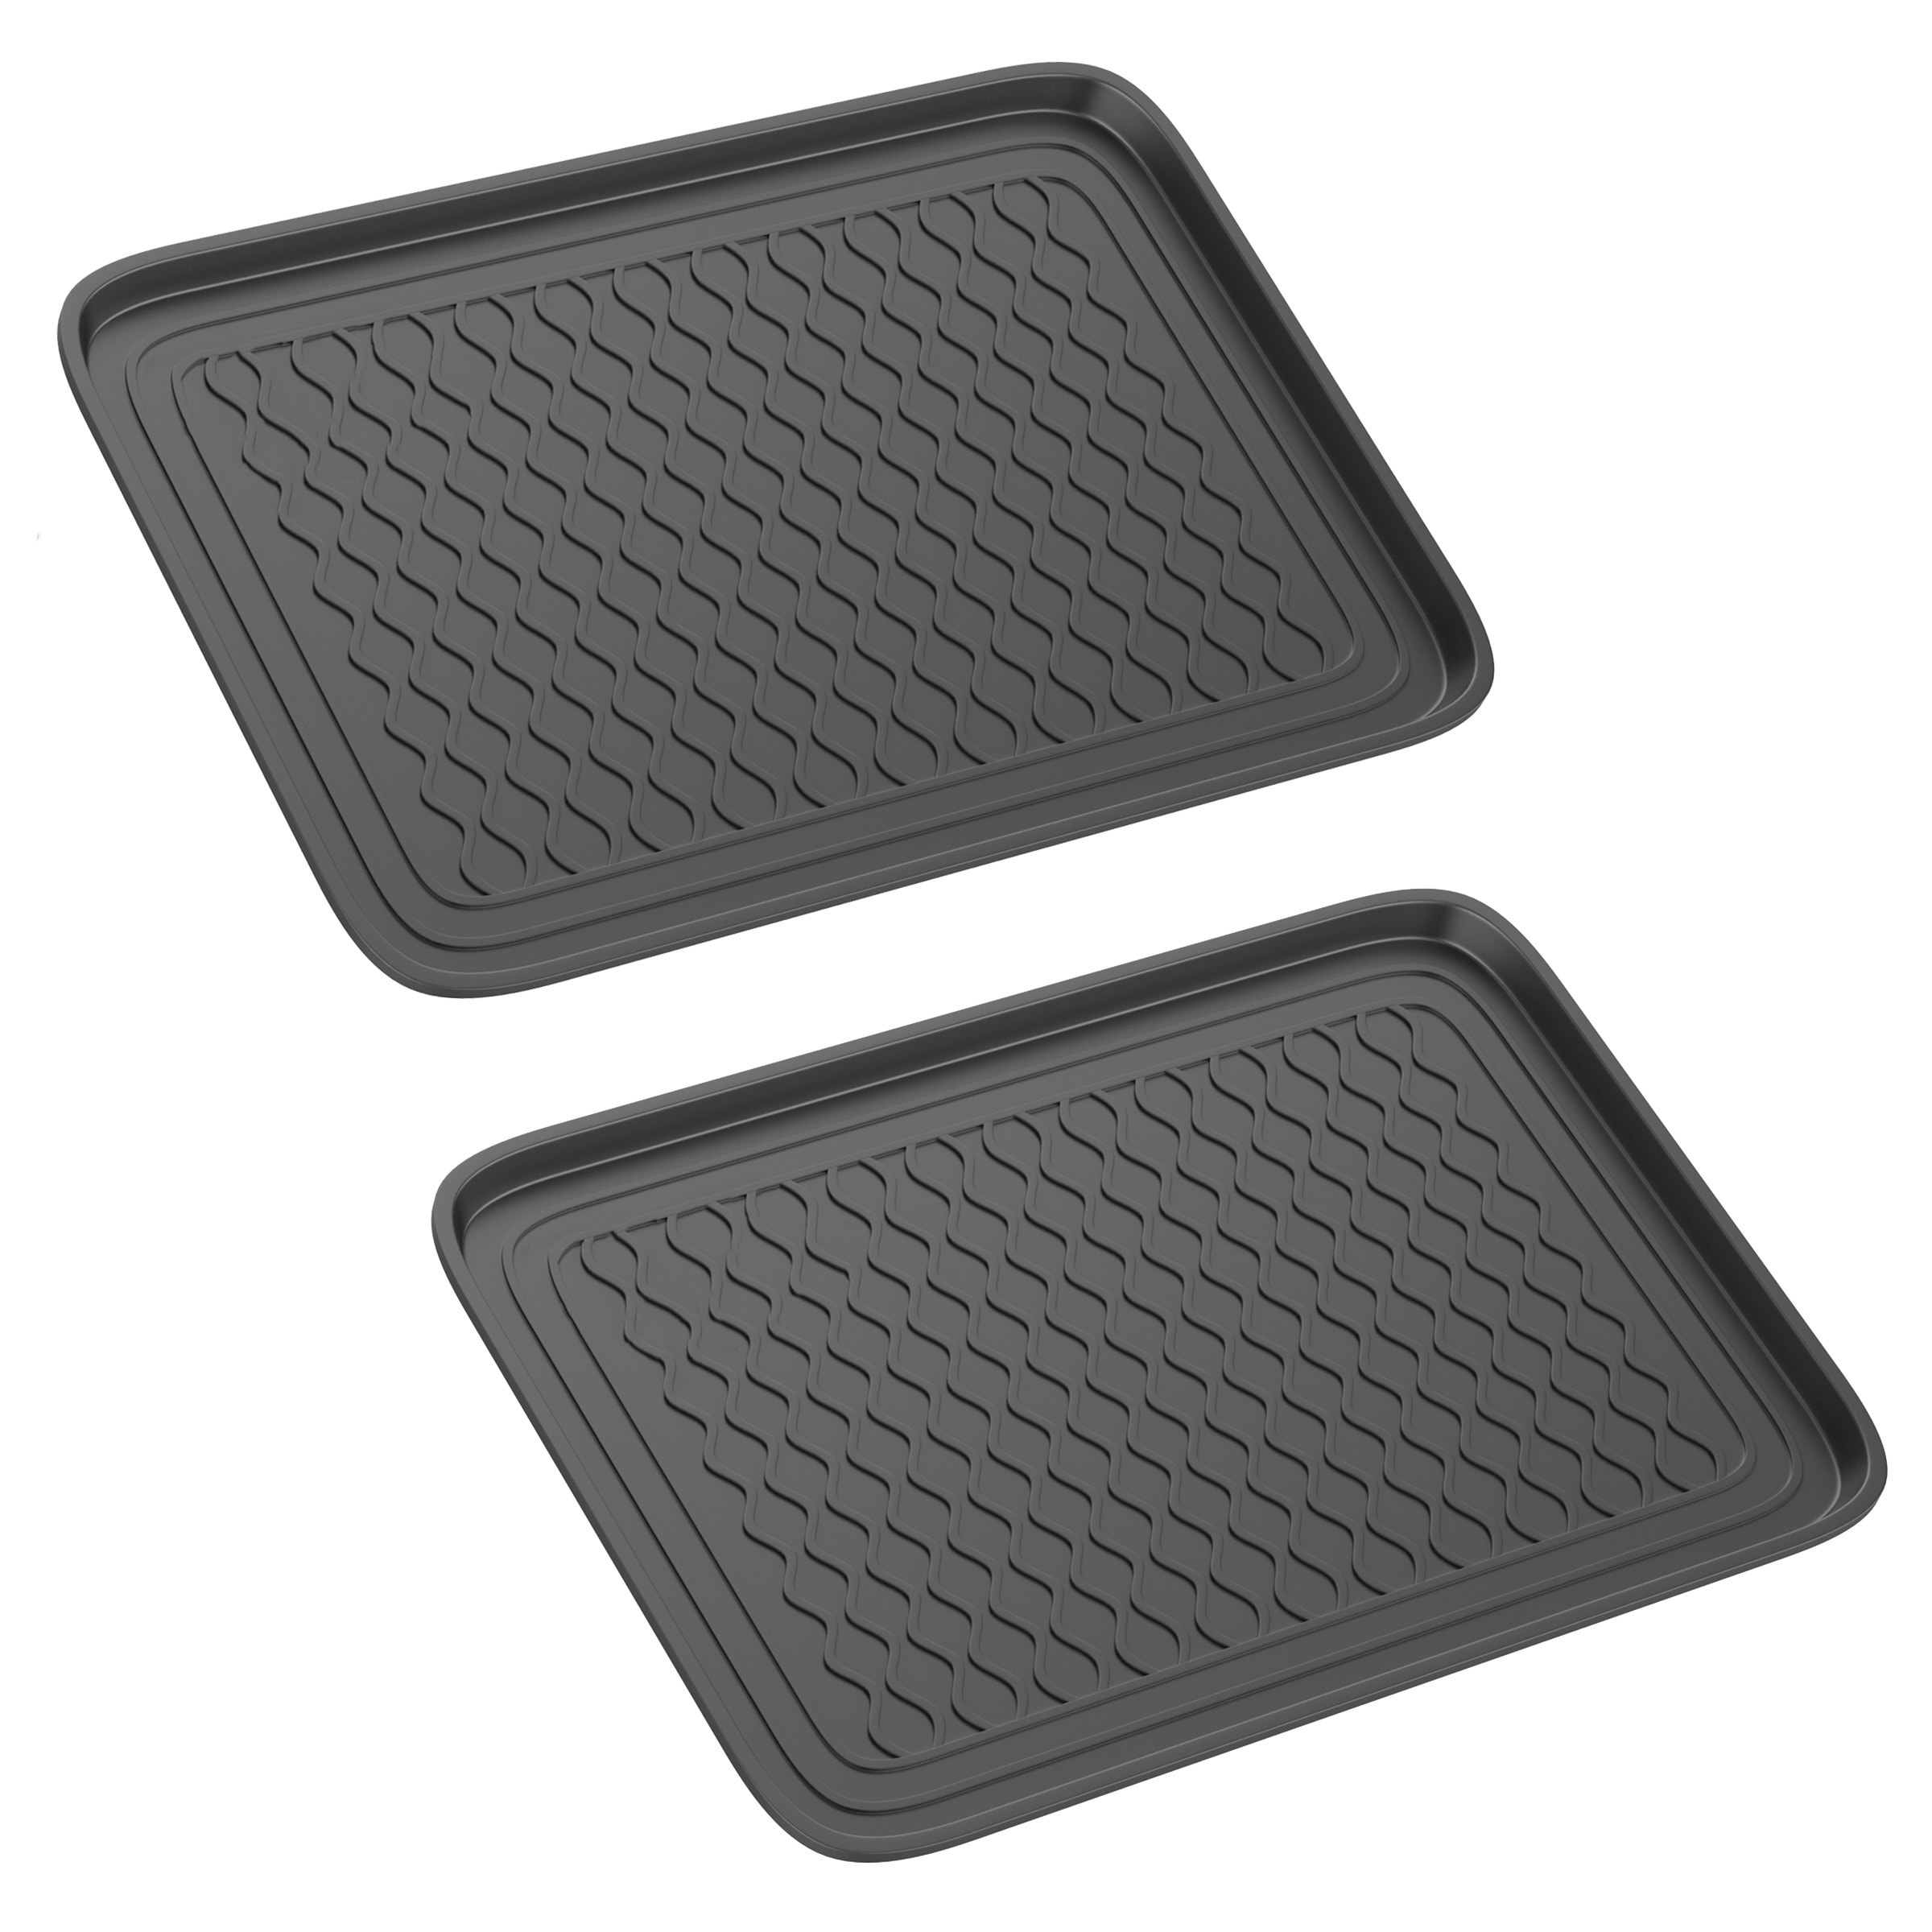 https://ak1.ostkcdn.com/images/products/is/images/direct/05f1de02129869b33cb0f7c2c39b929c2b0fe569/All-Weather-Boot-Tray---Medium-Water-Resistant-Plastic-Shoe-Mat-for-Indoor-and-Outdoor-Use-by-Stalwart-%28Set-of-Two%2C-Dark-Grey%29.jpg